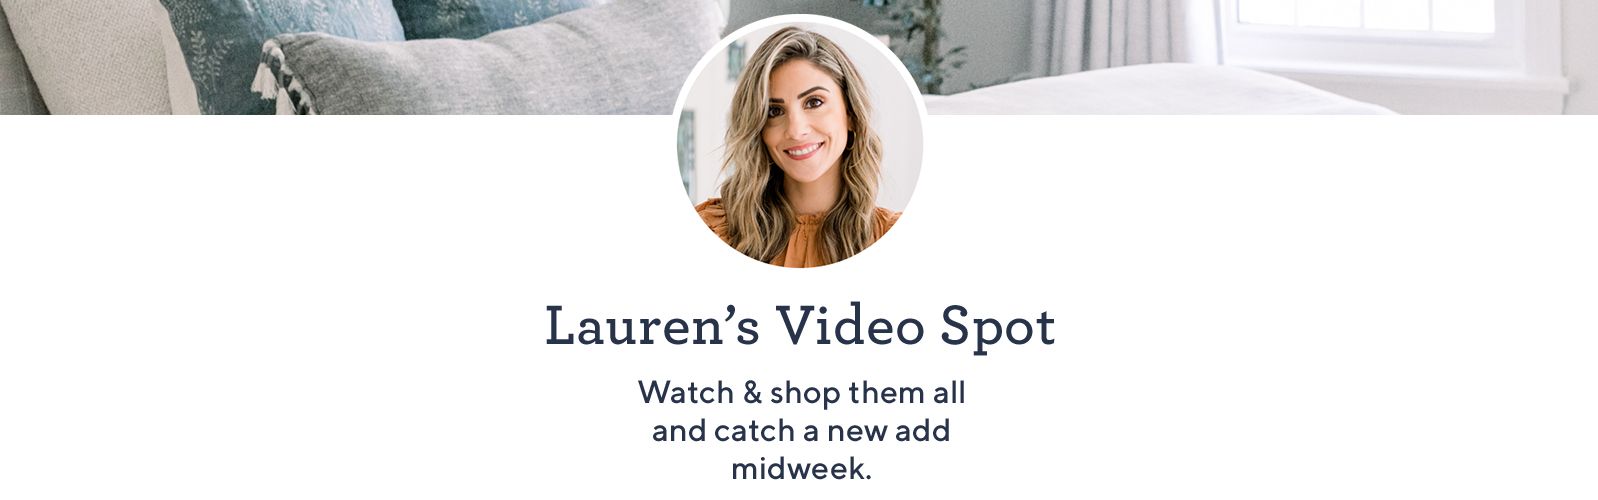 Lauren's Video Spot. Watch & shop them all and catch a new add midweek.